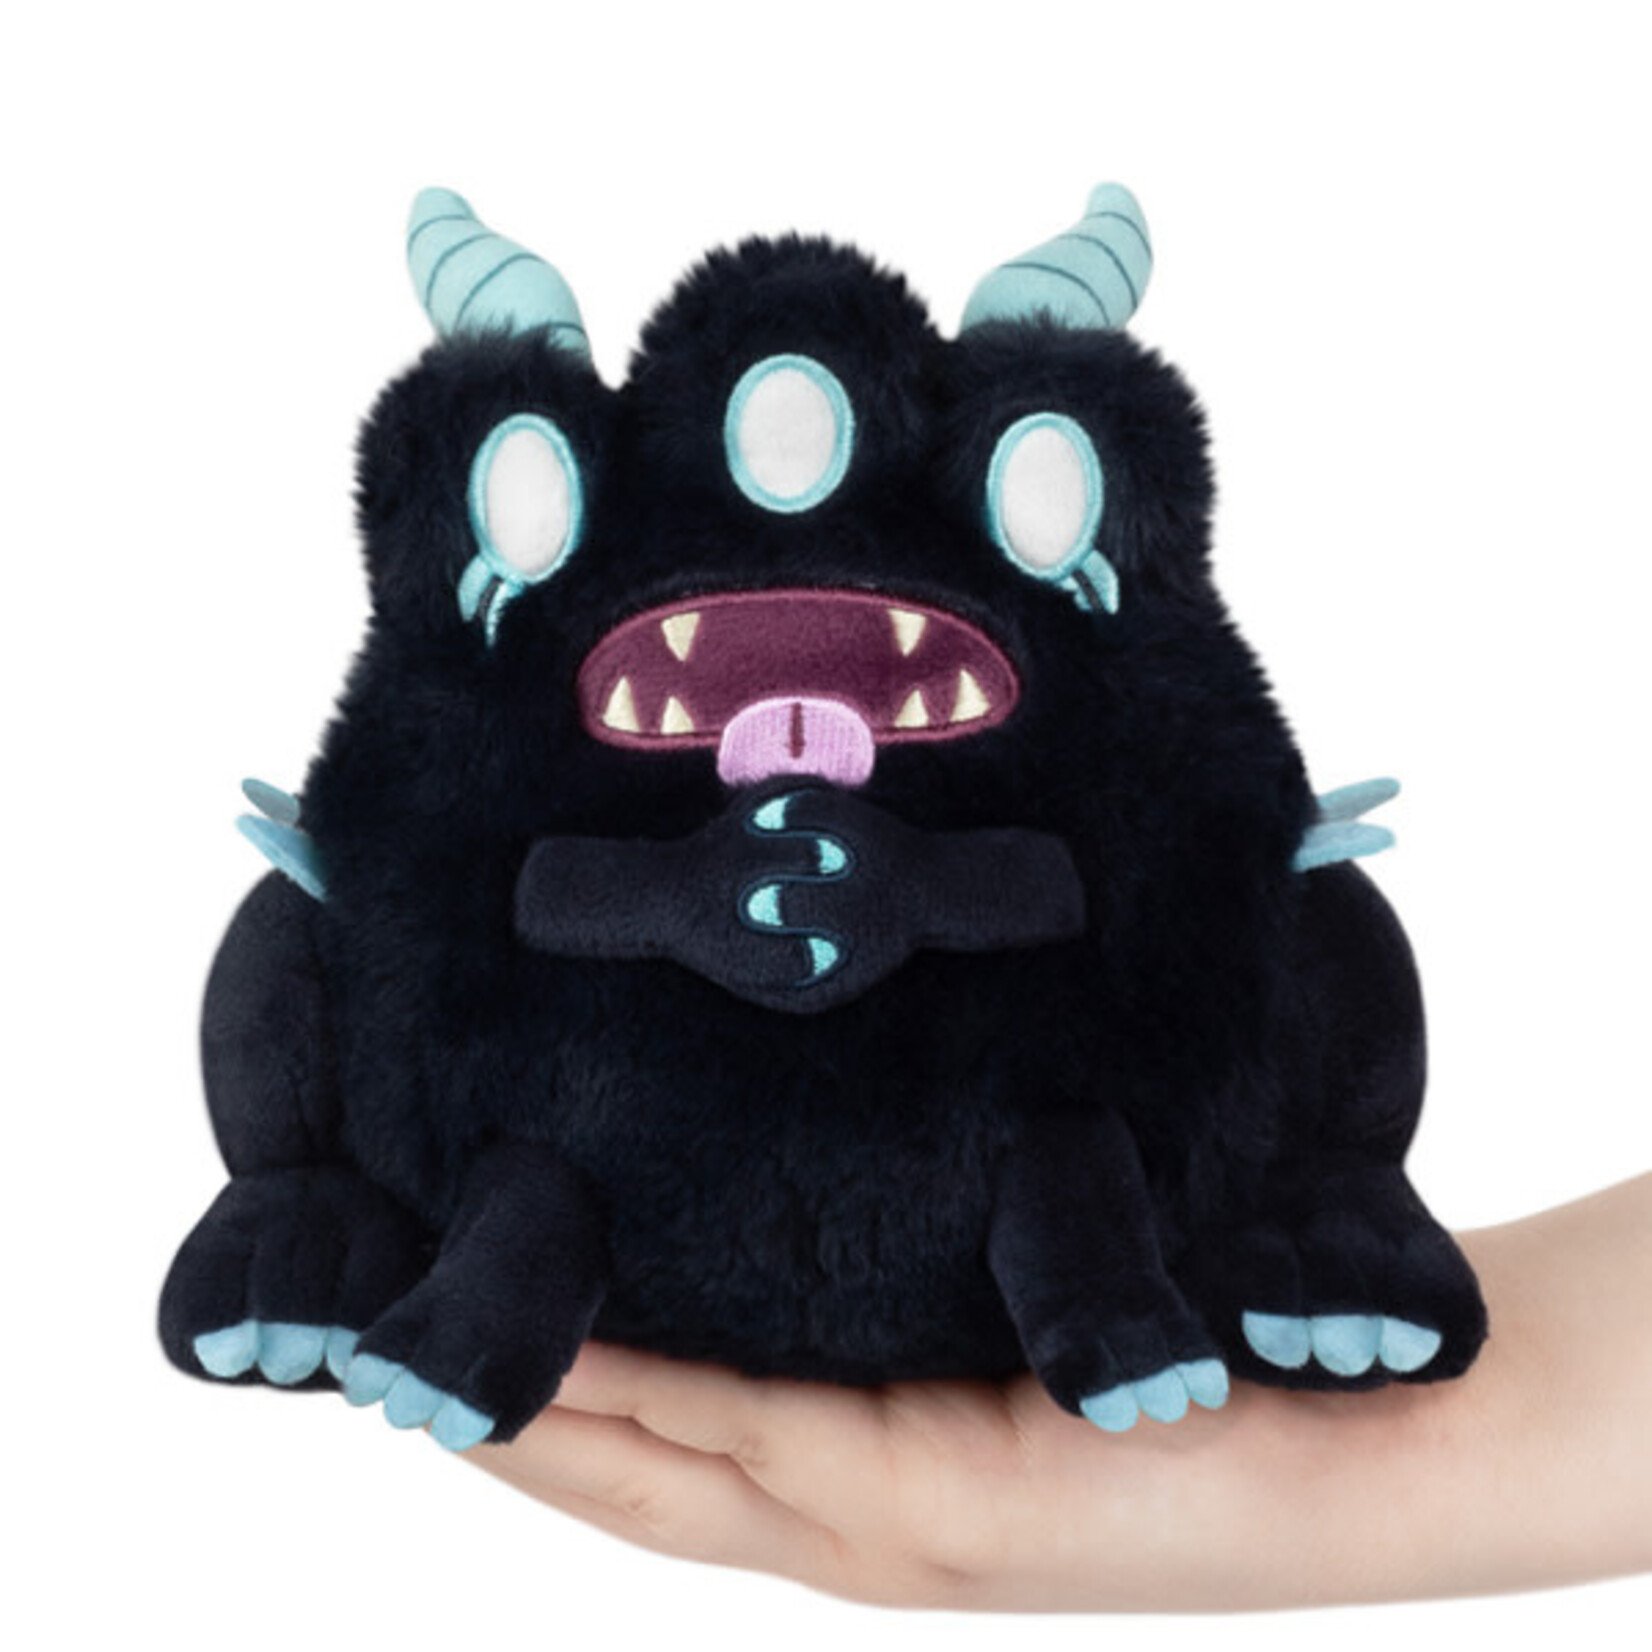 Squishable Alter Egos: Frog